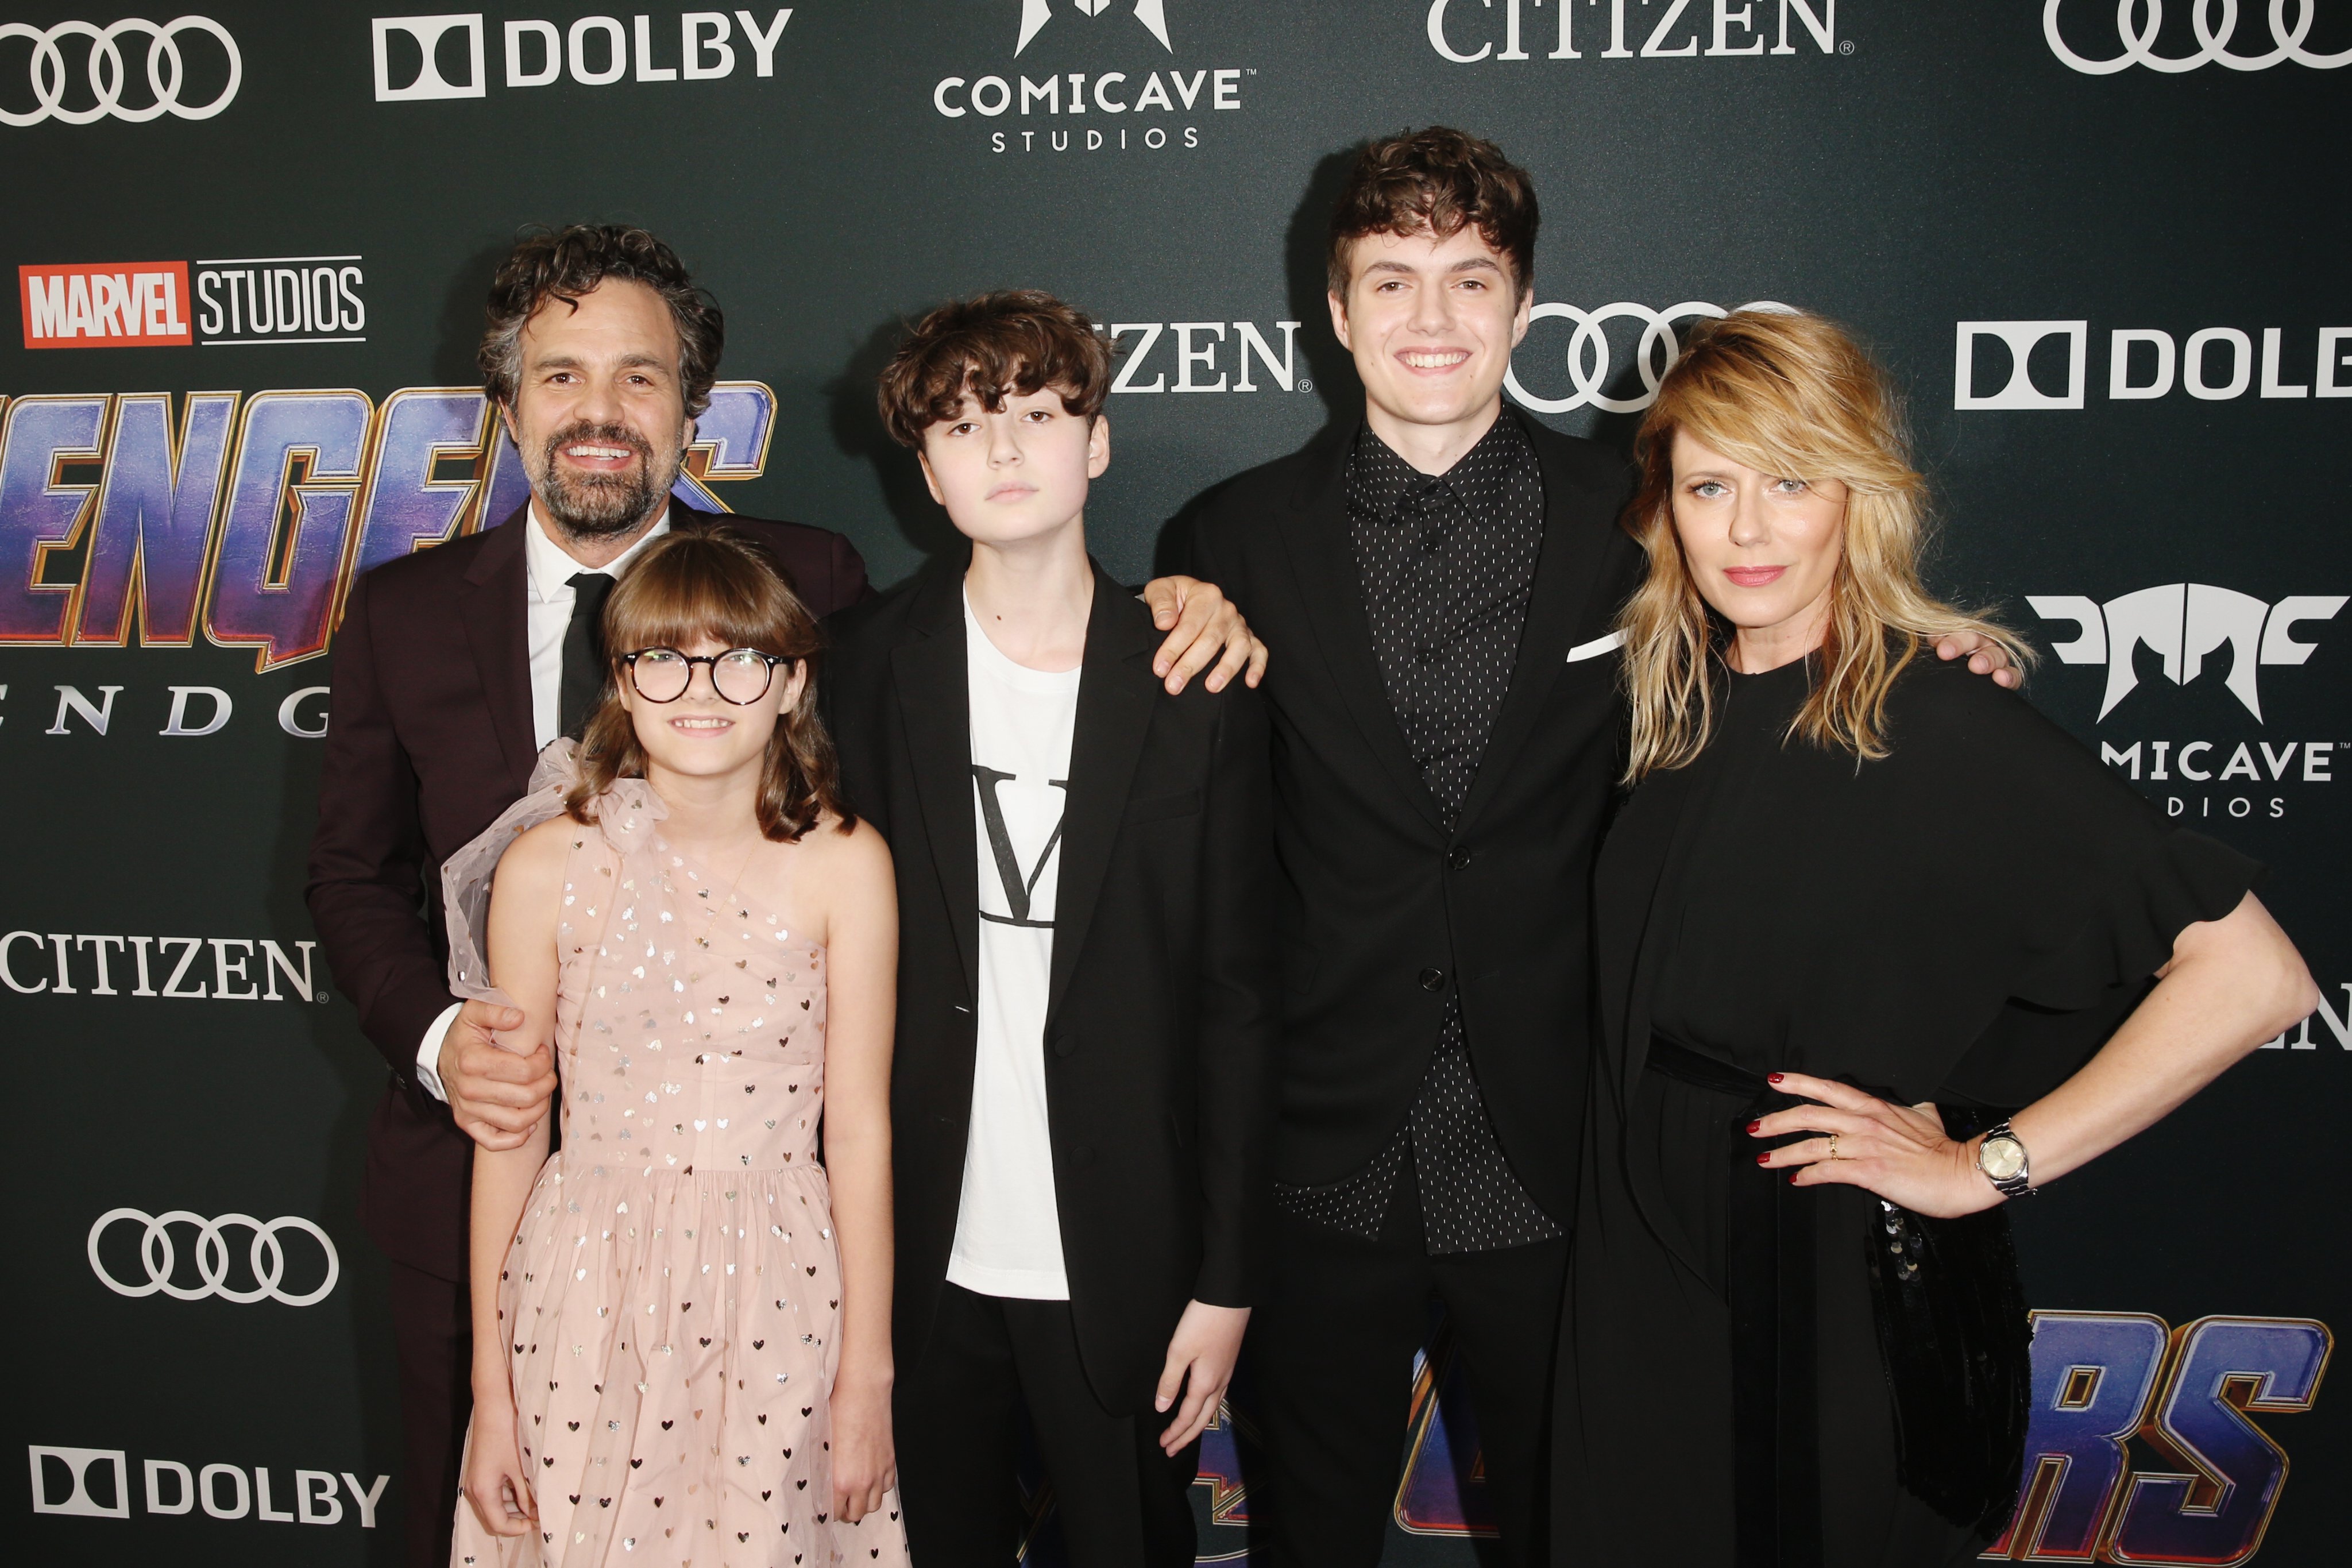 Mark Ruffalo and wife, Sunrise Coigney with their children at the Los Angeles World Premiere of Marvel Studios' "Avengers: Endgame" at the Los Angeles Convention Center on April 23, 2019 in Los Angeles, California. | Source: Getty Images